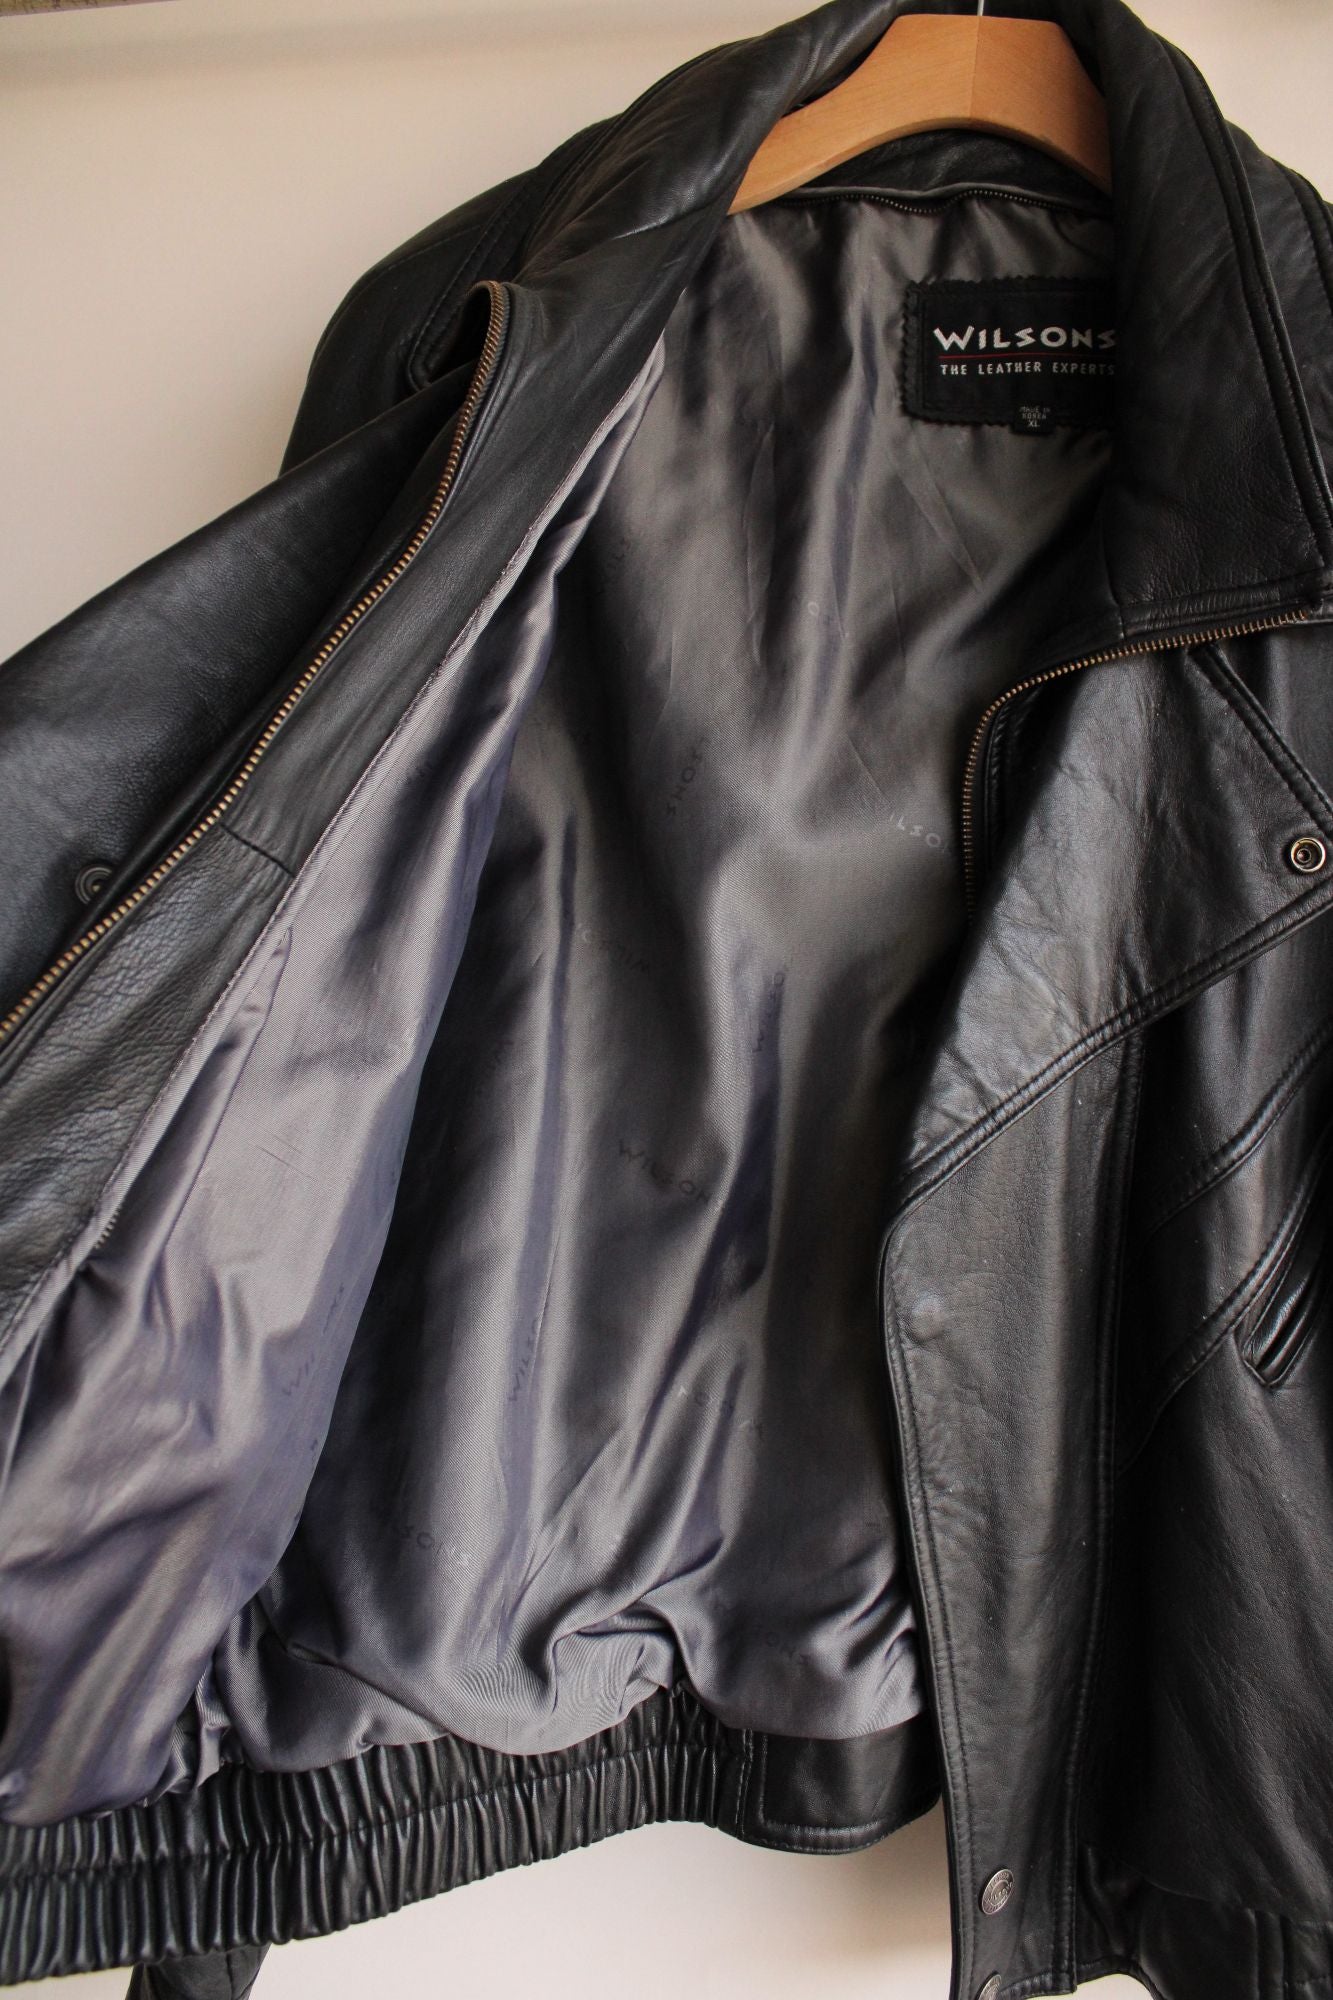 Wilsons Mens Leather Jacket, Black, Size XL, Bomber Style, Multiple Pockets, Fully Lined